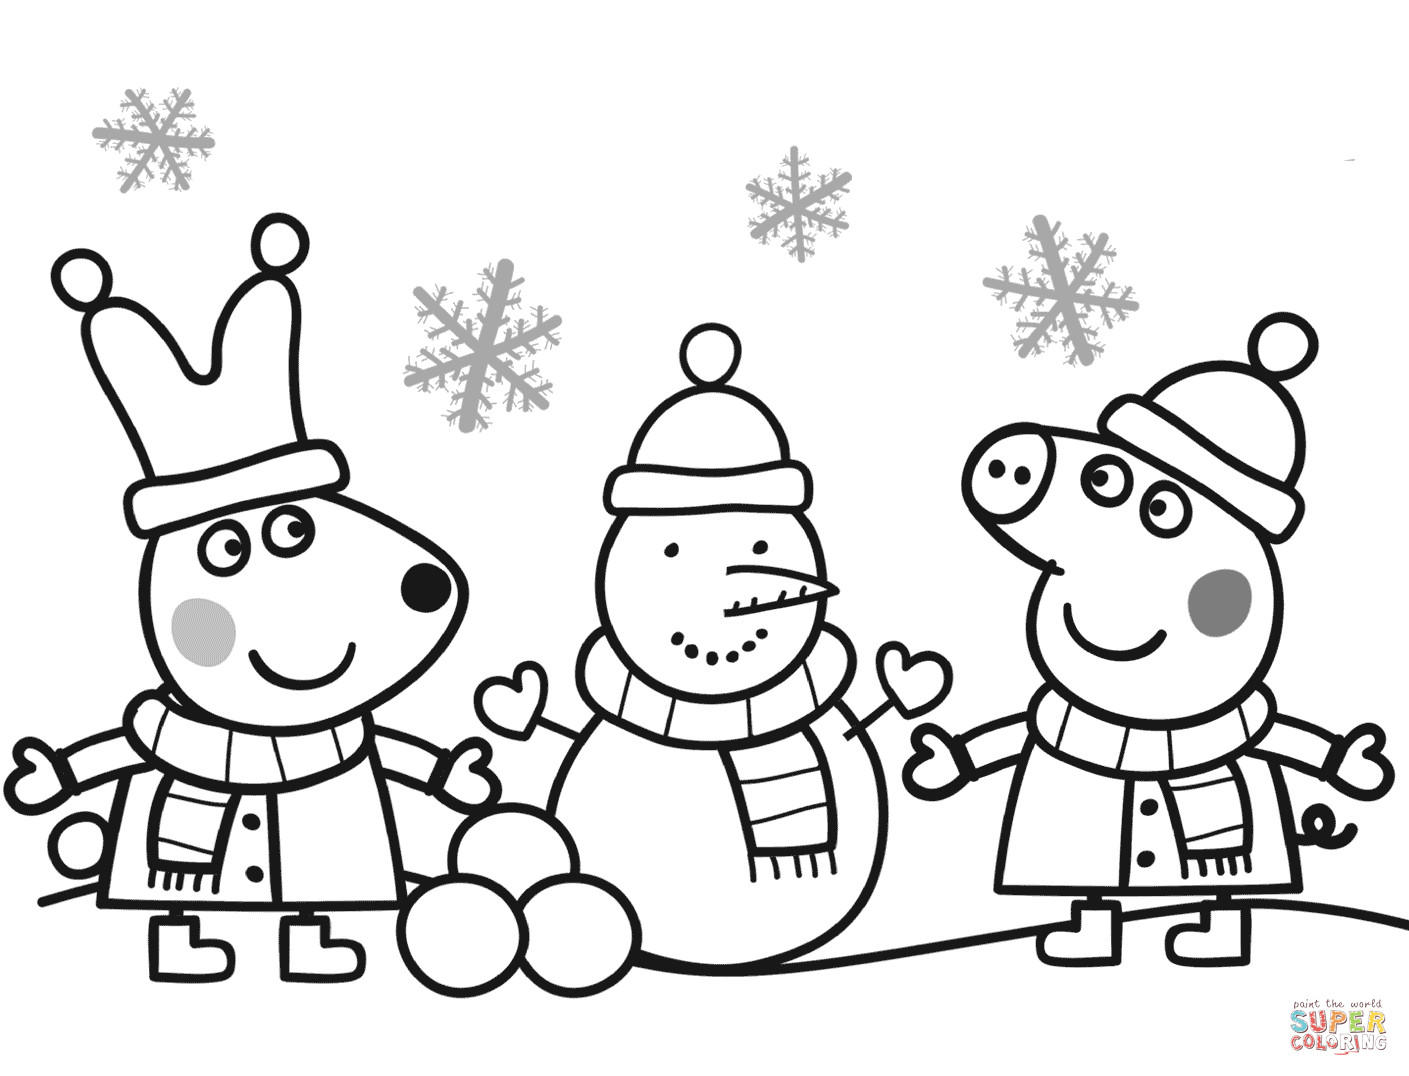 Peppa Pig Coloring Pages
 Peppa and Rebecca are Making Snowman coloring page